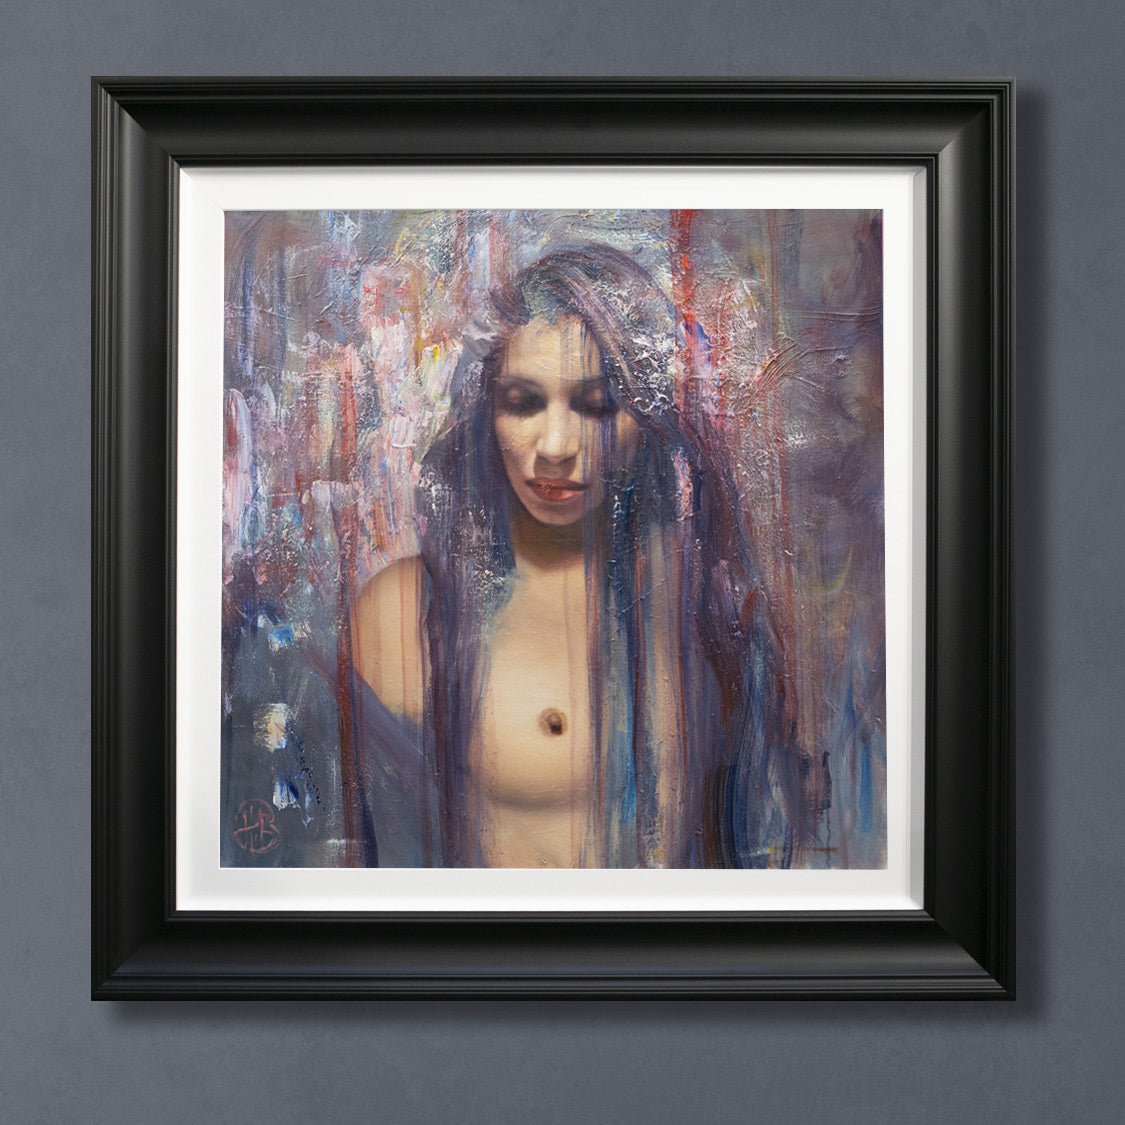 Hamish Blakely - 'Vapour' - Framed Limited Edition